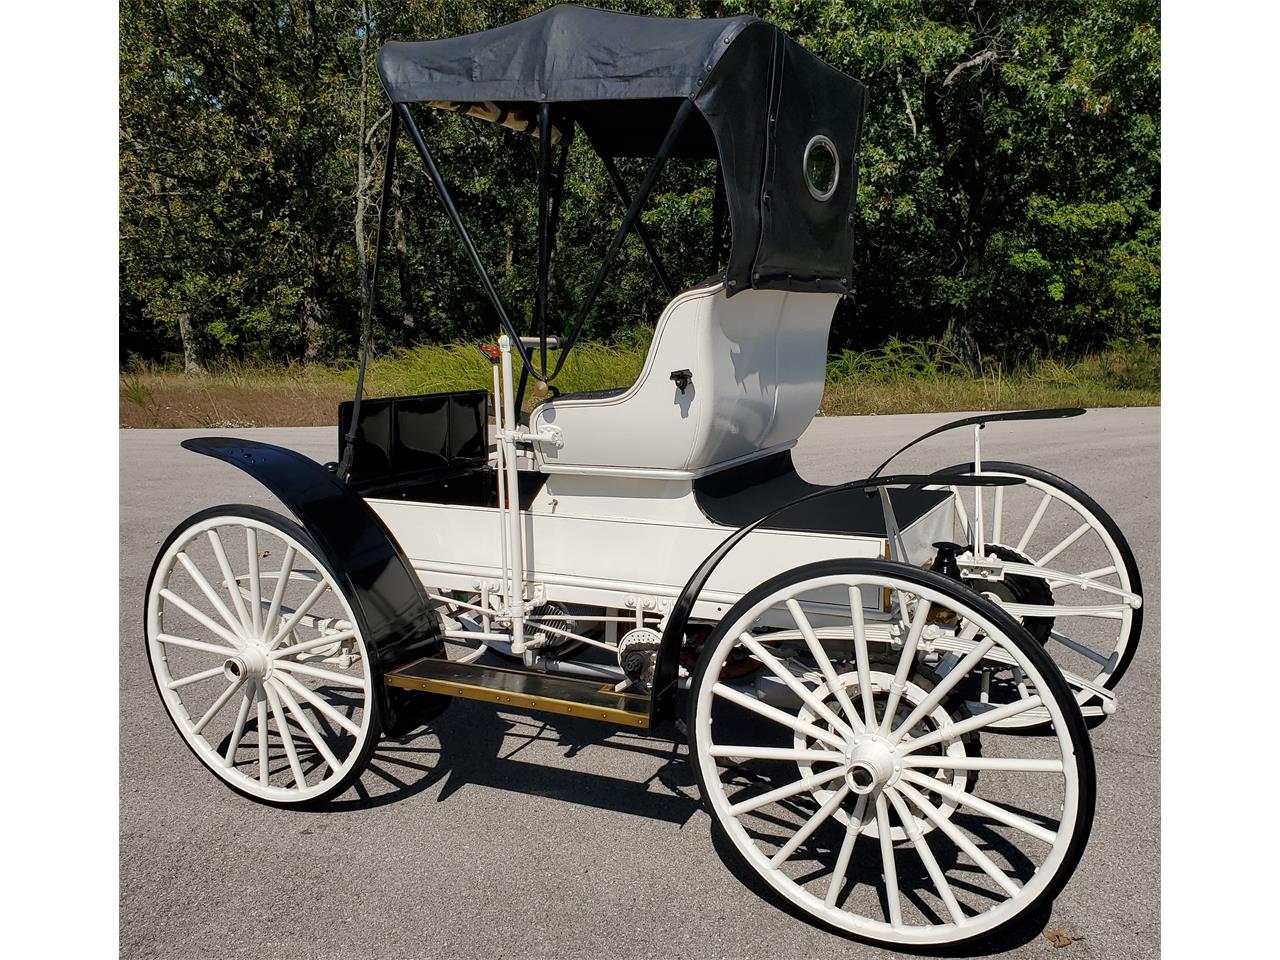 1909 sears motor buggy for sale